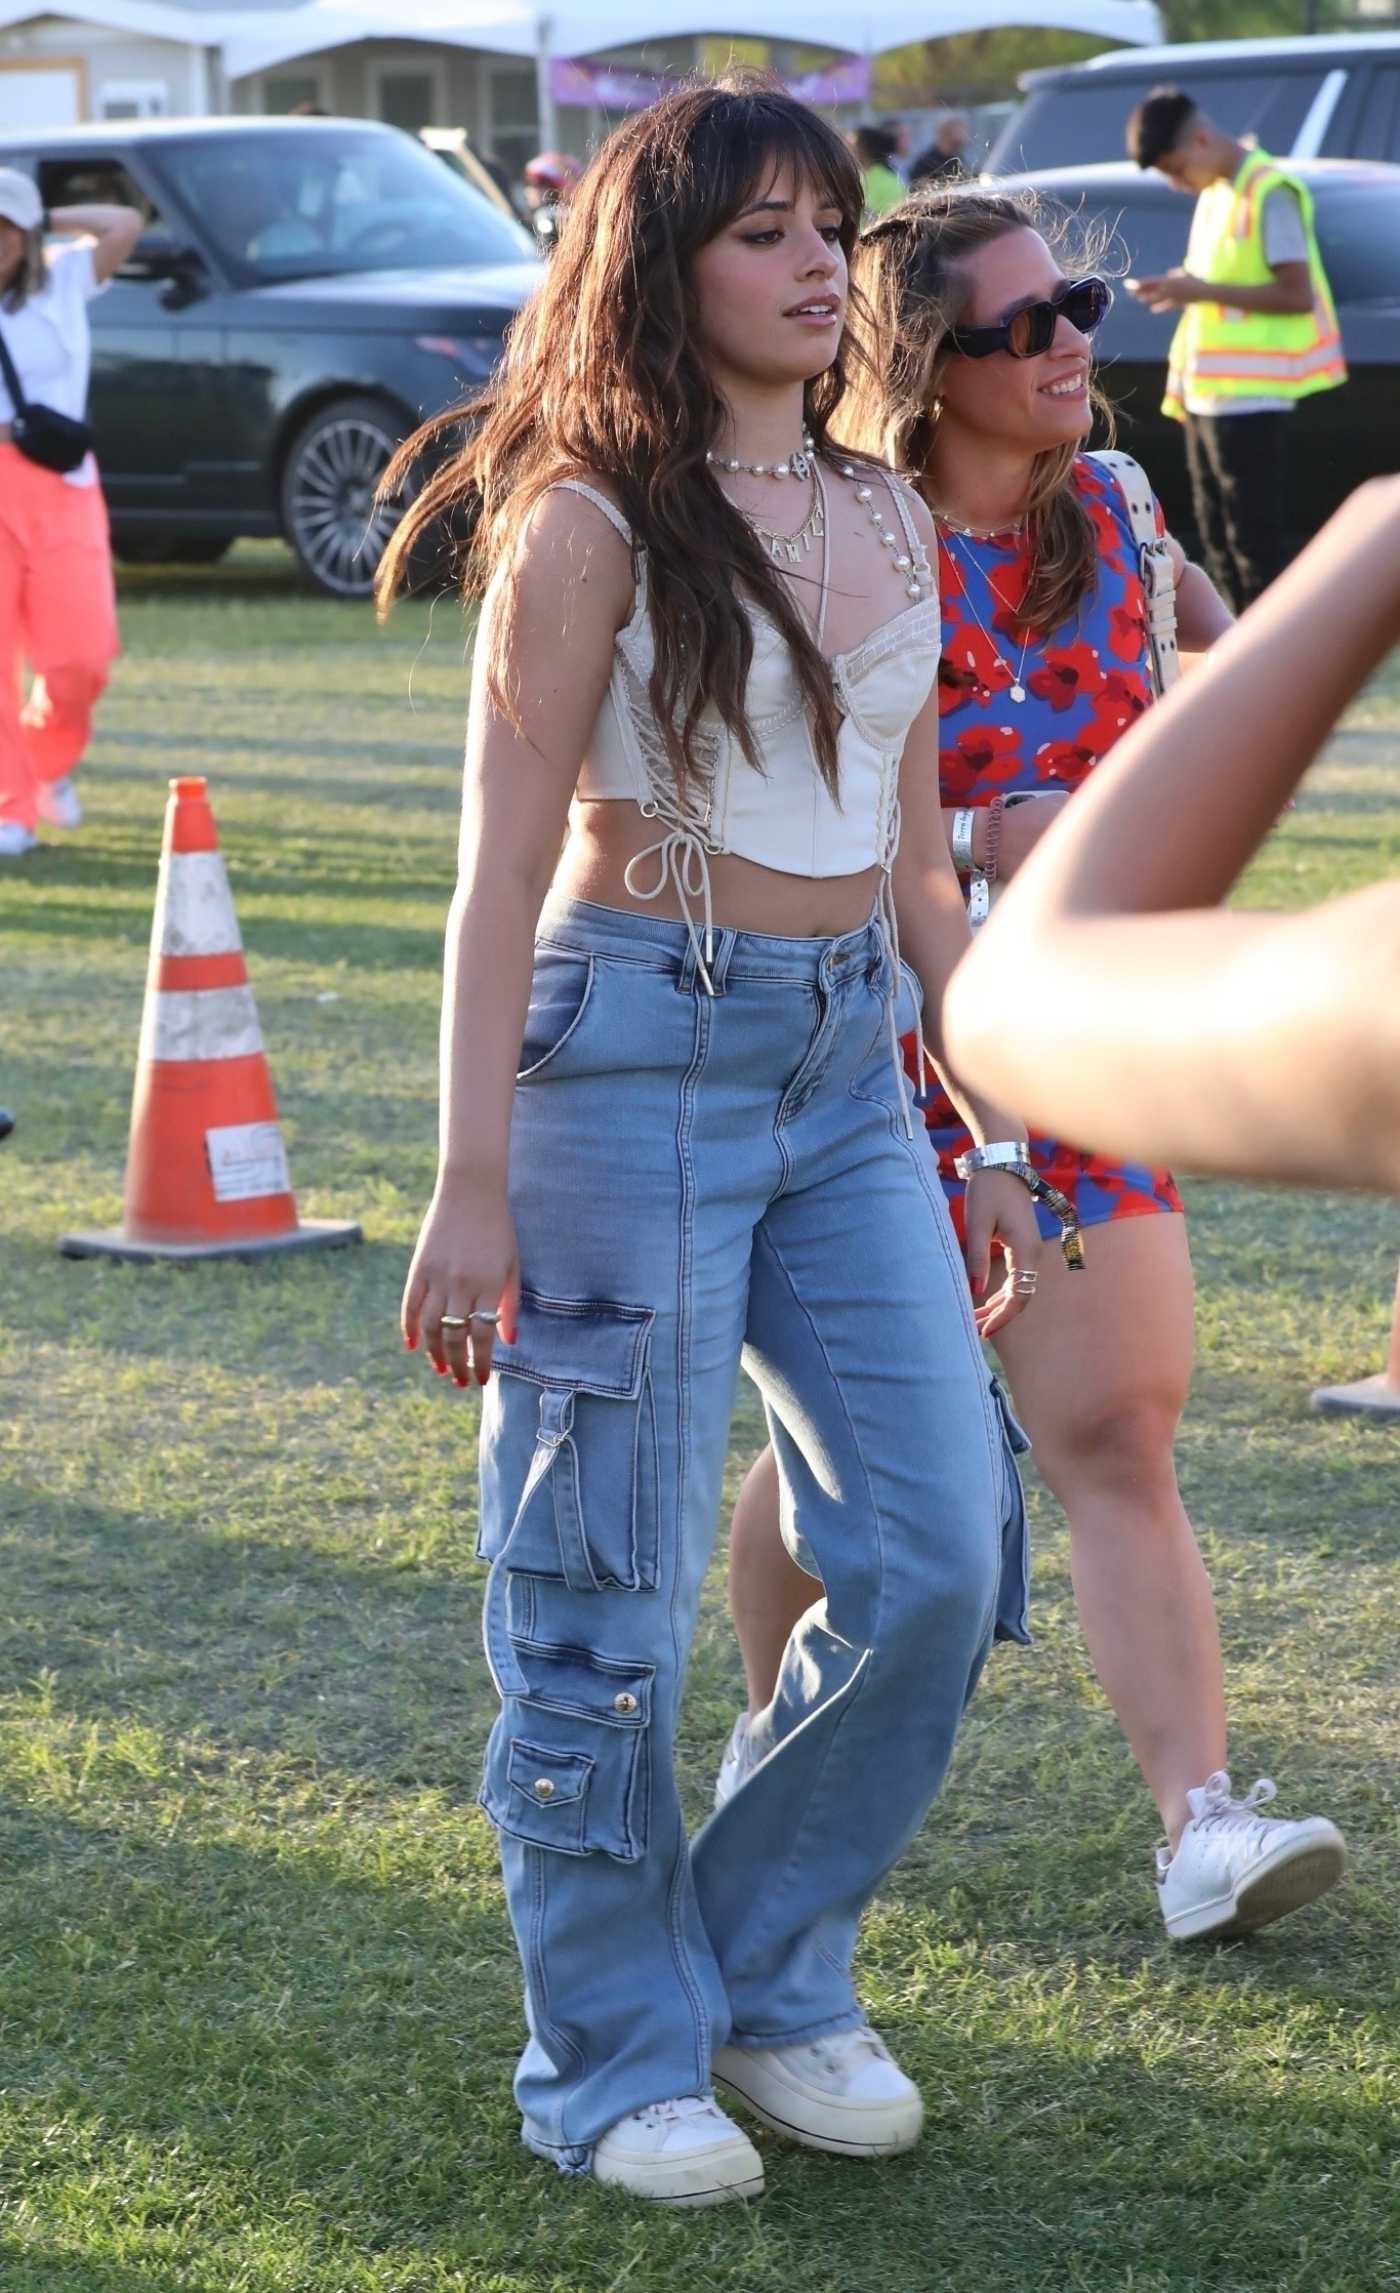 Camila Cabello in a White Top Arrives at 2023 Coachella Valley Music and Arts Festival in Indio 04/14/2023